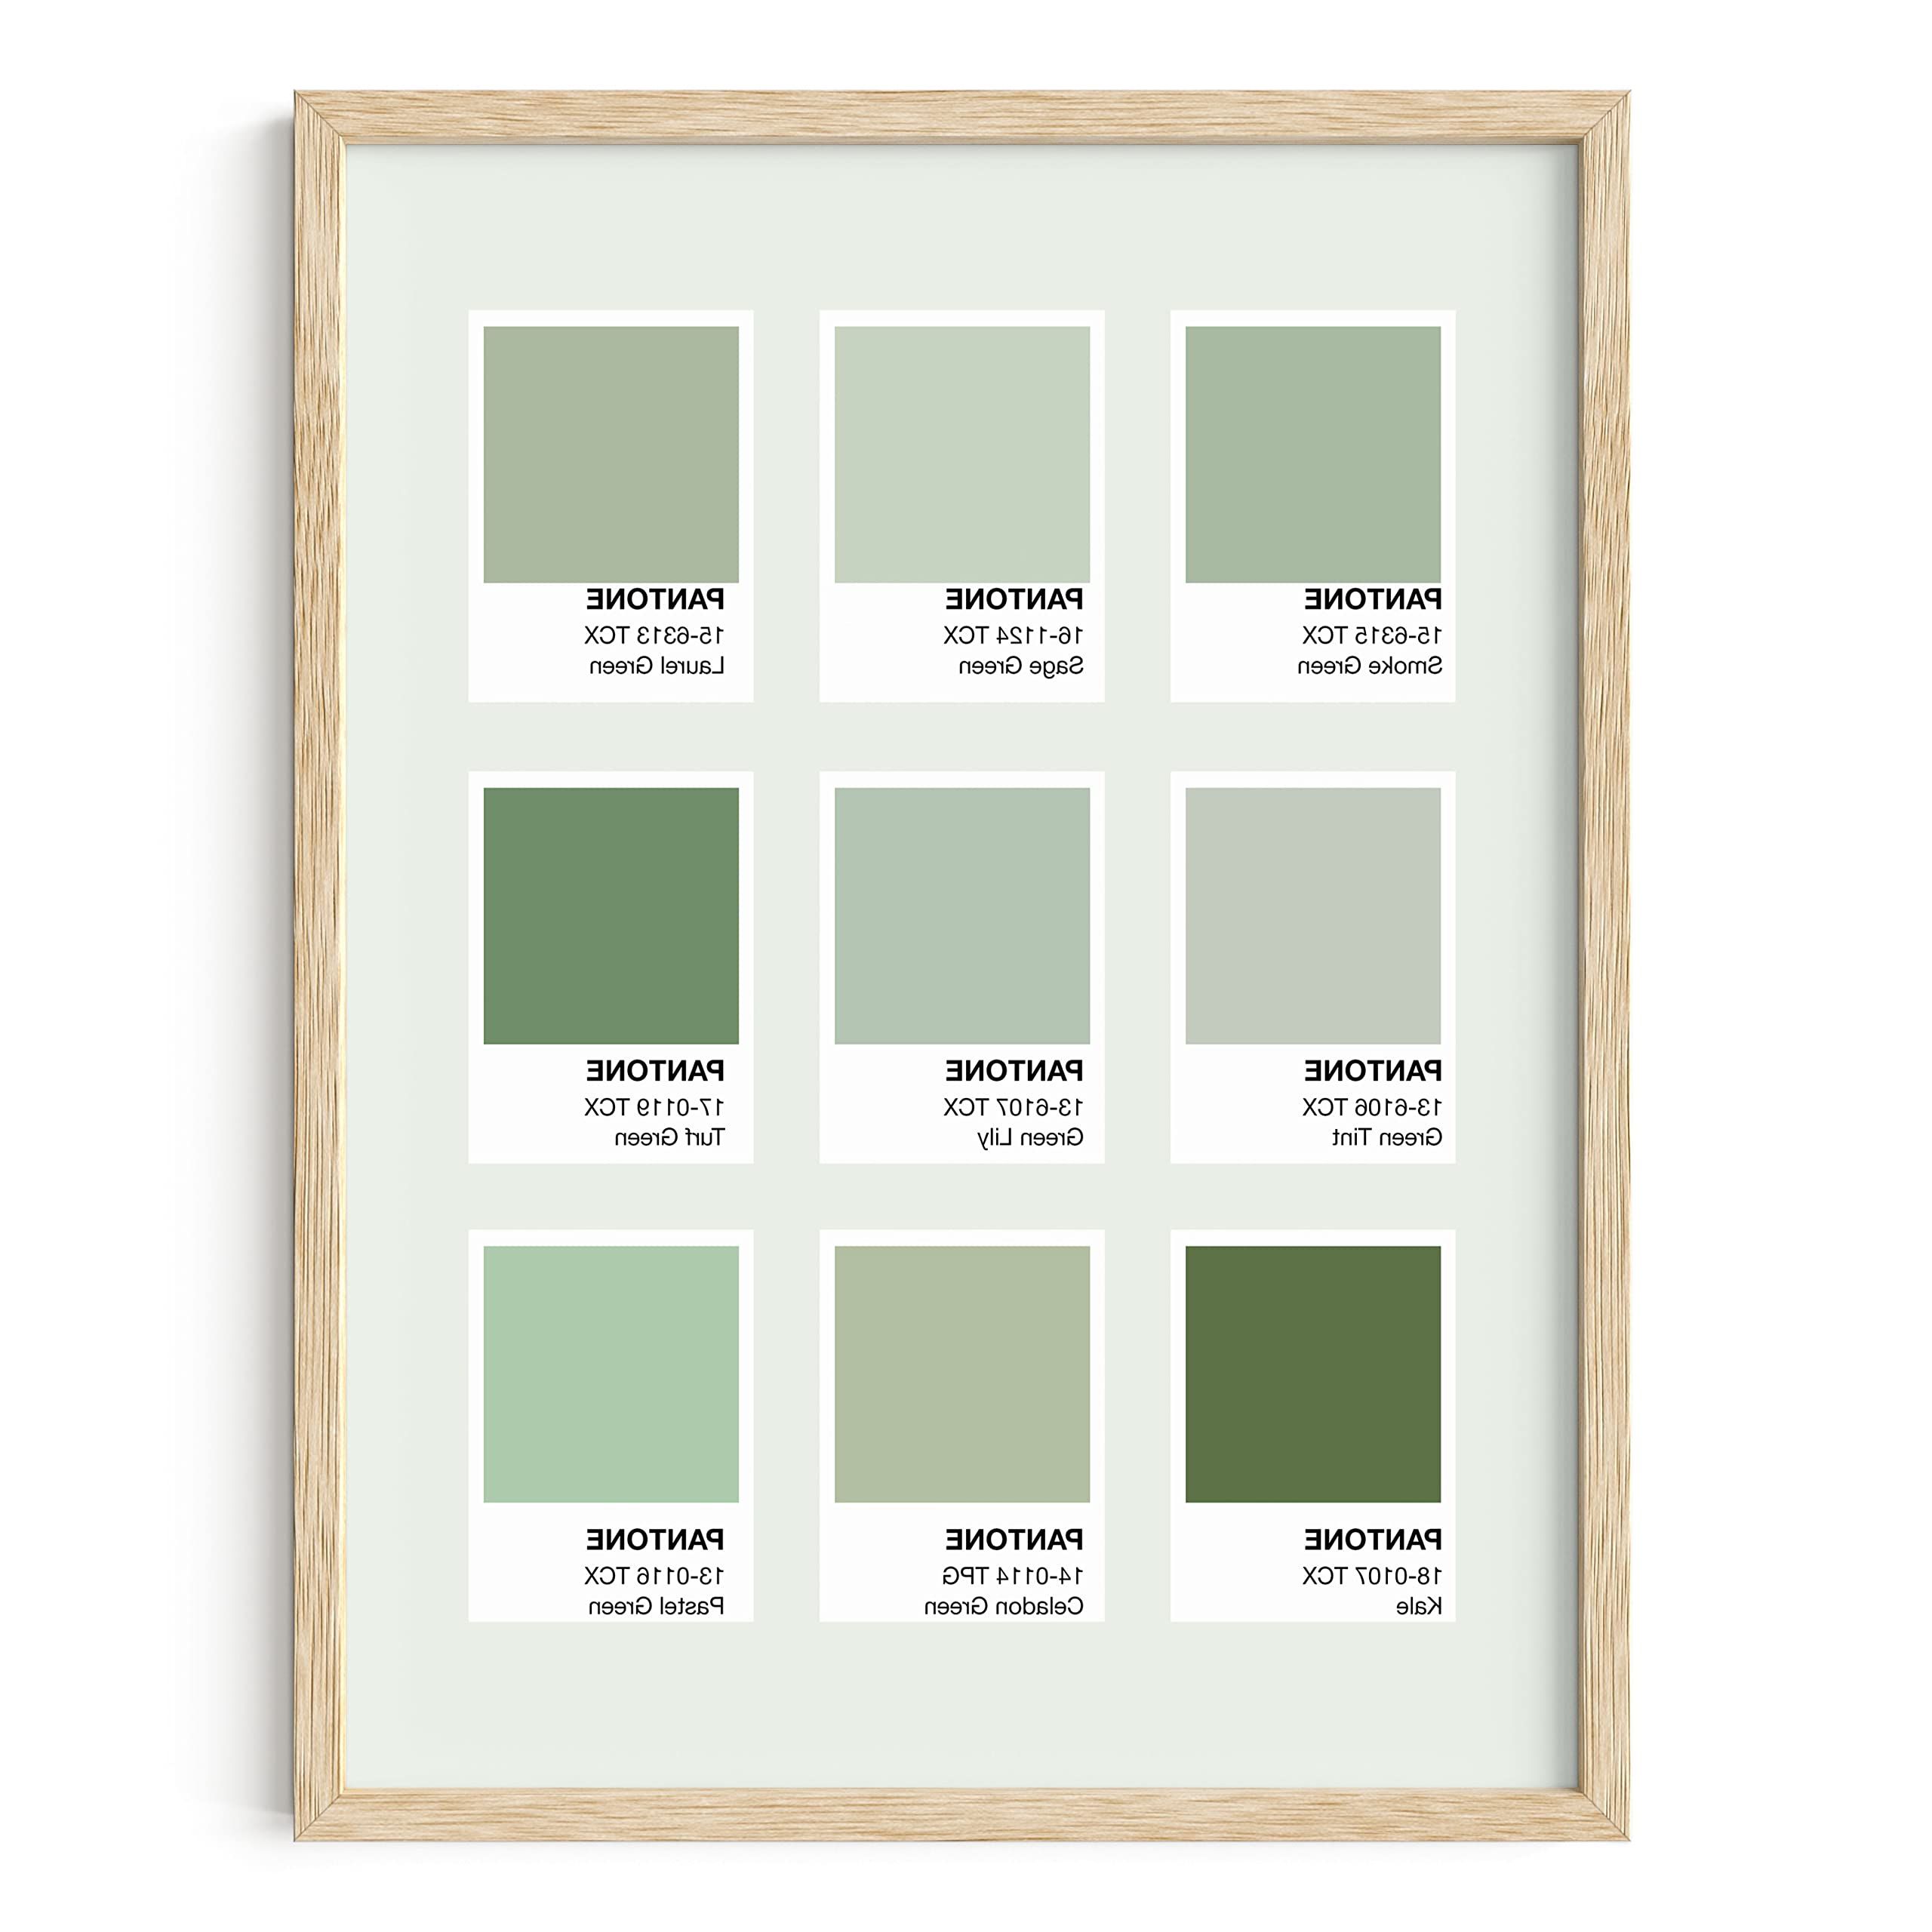 Light Sage Wall Art Inside Preferred Amazon: Sage Green Room Decor Aesthetic  Haus And Hues Green Wall  Decor Dorm Room Wall Decor Sage Green Wall Decor Aesthetic Posters For  Bedroom Green Wall Art Dark Green Room (View 11 of 15)